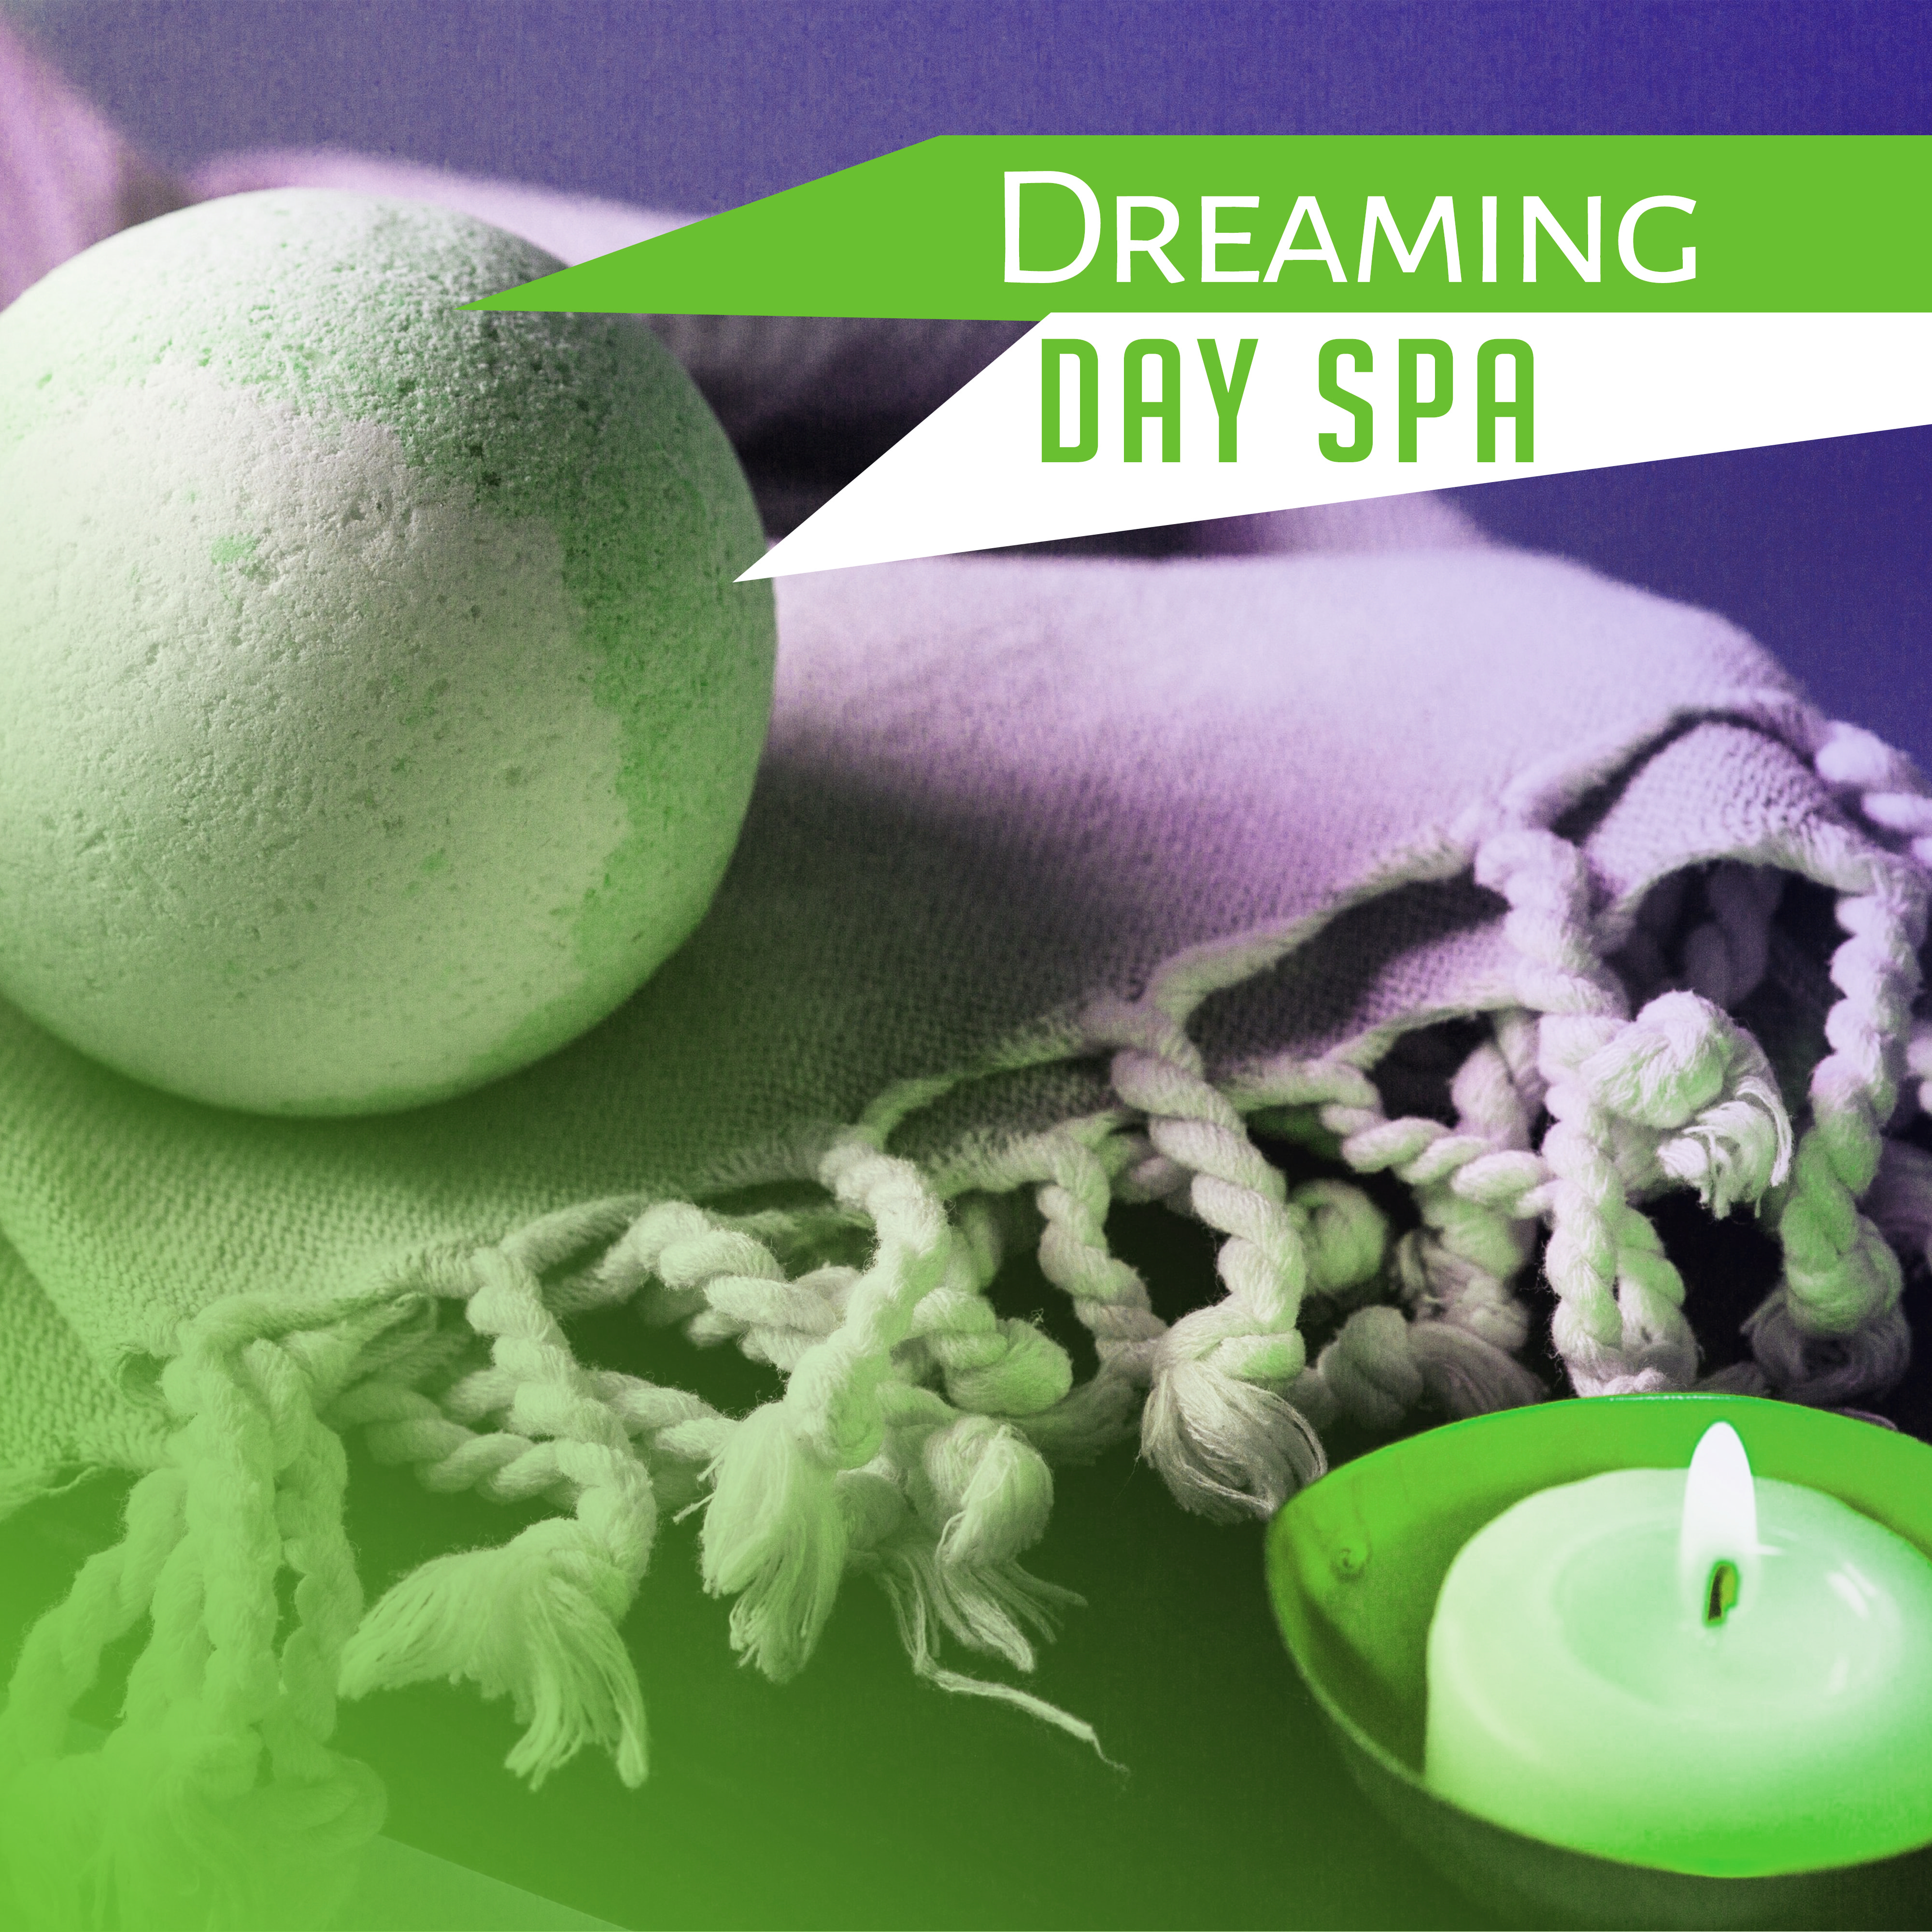 Dreaming Day Spa  Relaxation  Spa, Nature Sounds, Deep Relaxation, Wellness, Massage